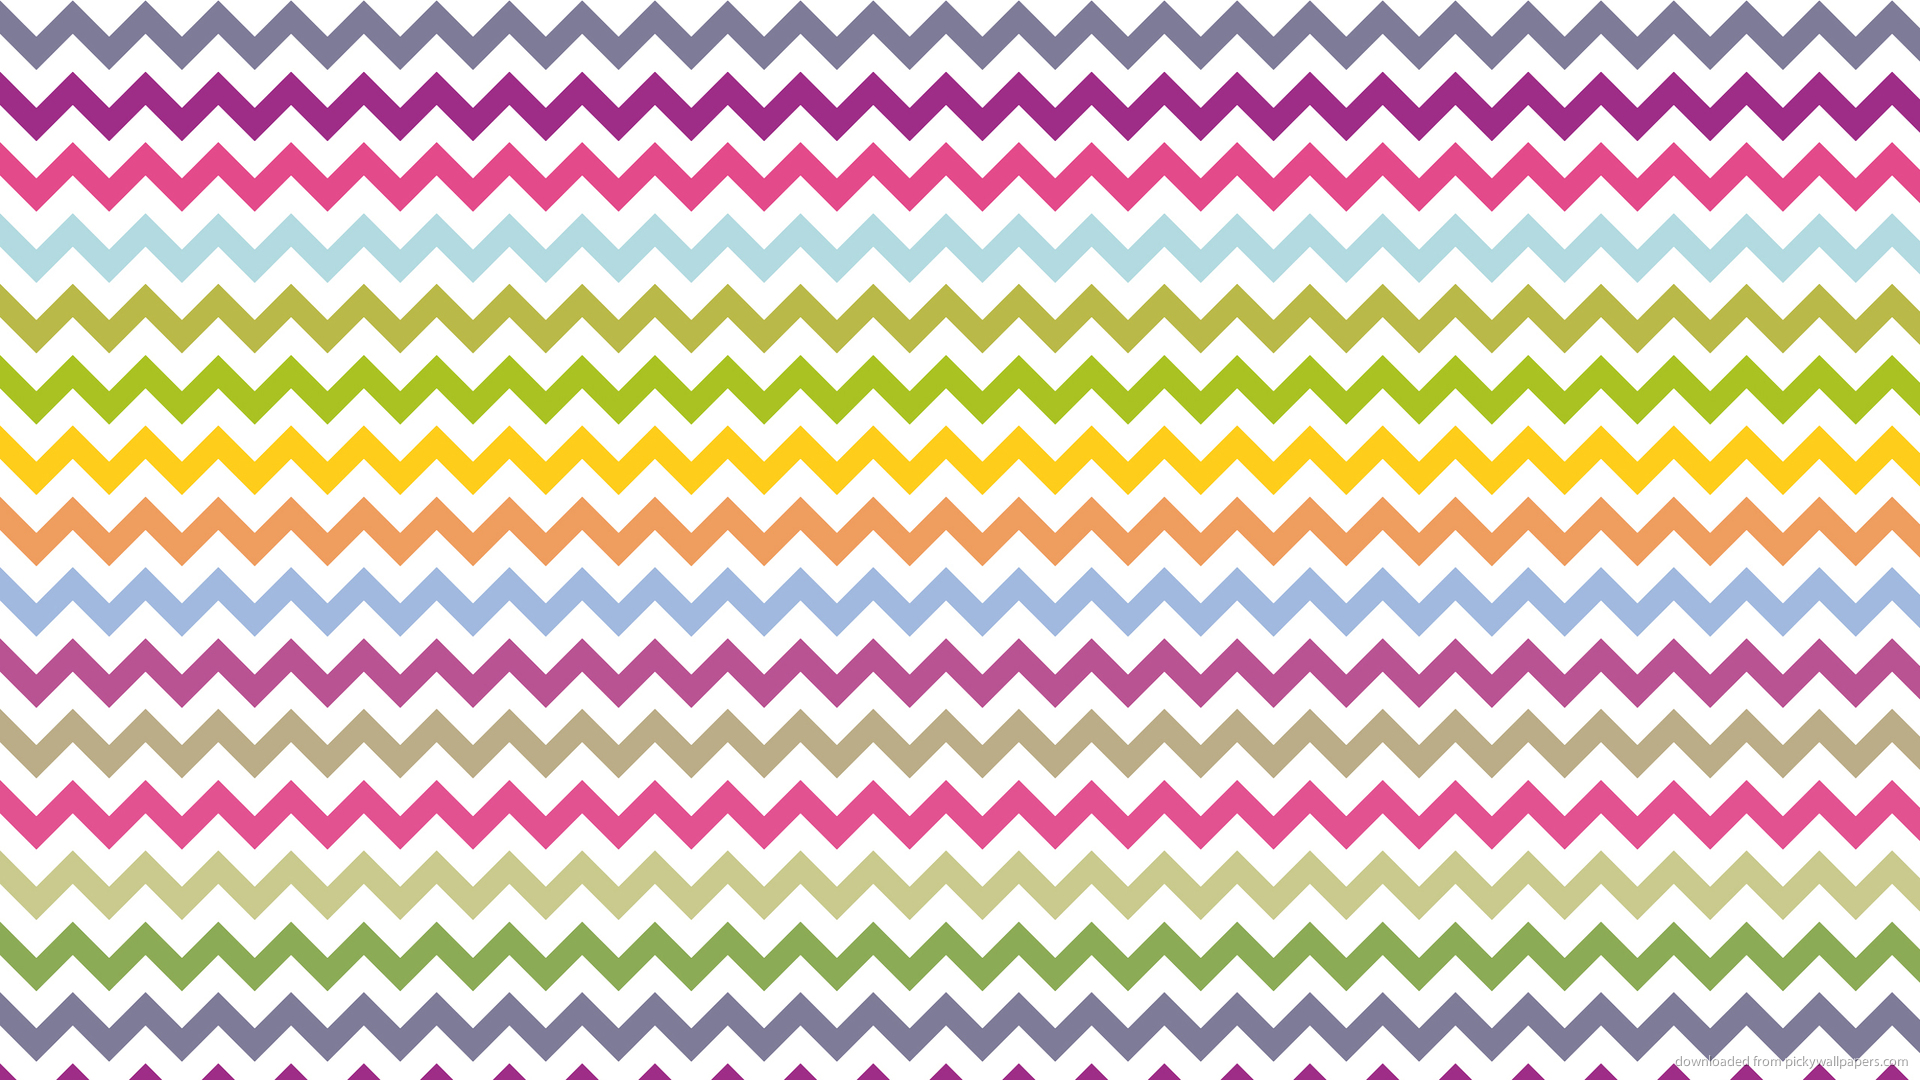 Colorful Chevron Pattern Wallpaper Screensaver For Kindle3 And Dx